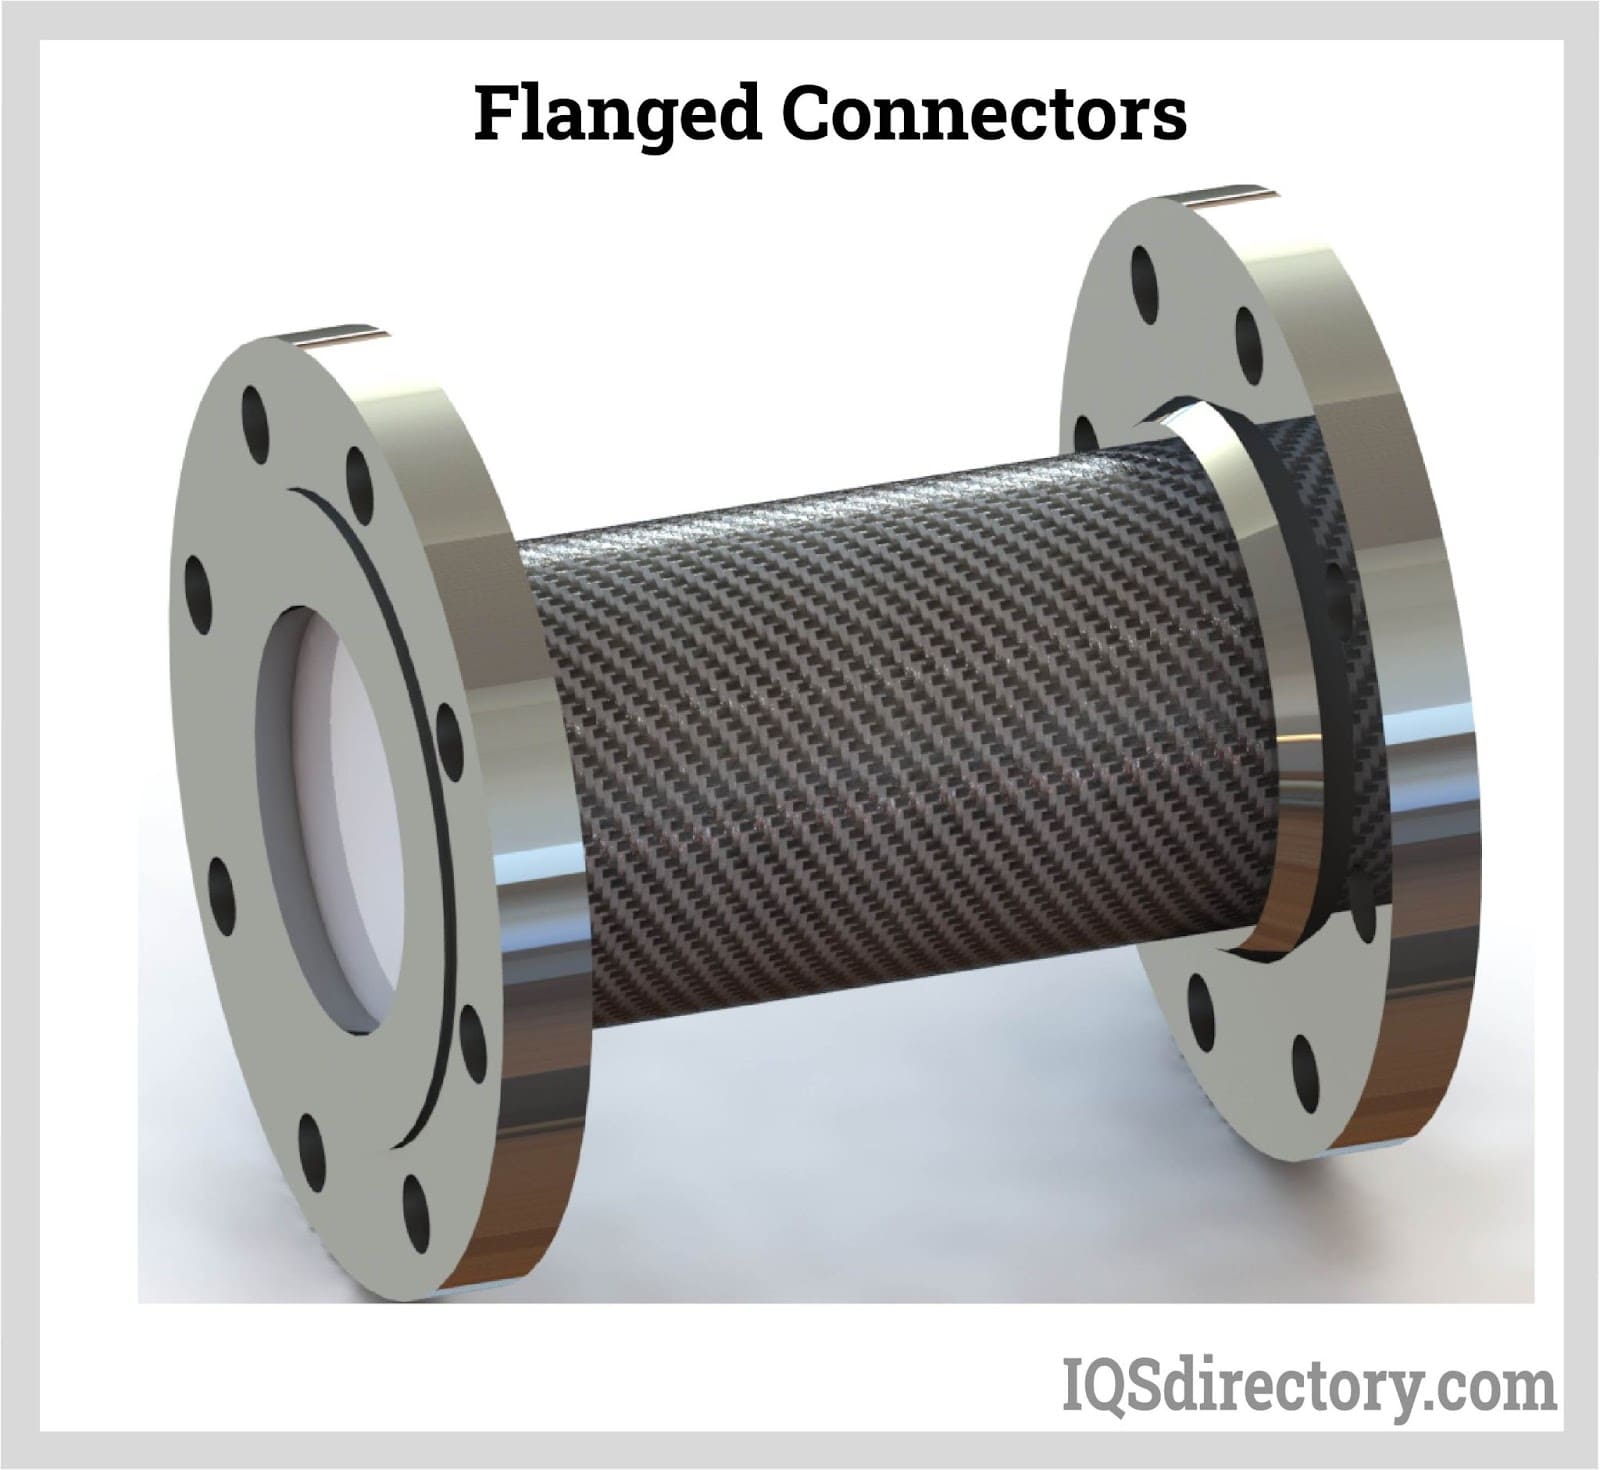 Flanged Connectors